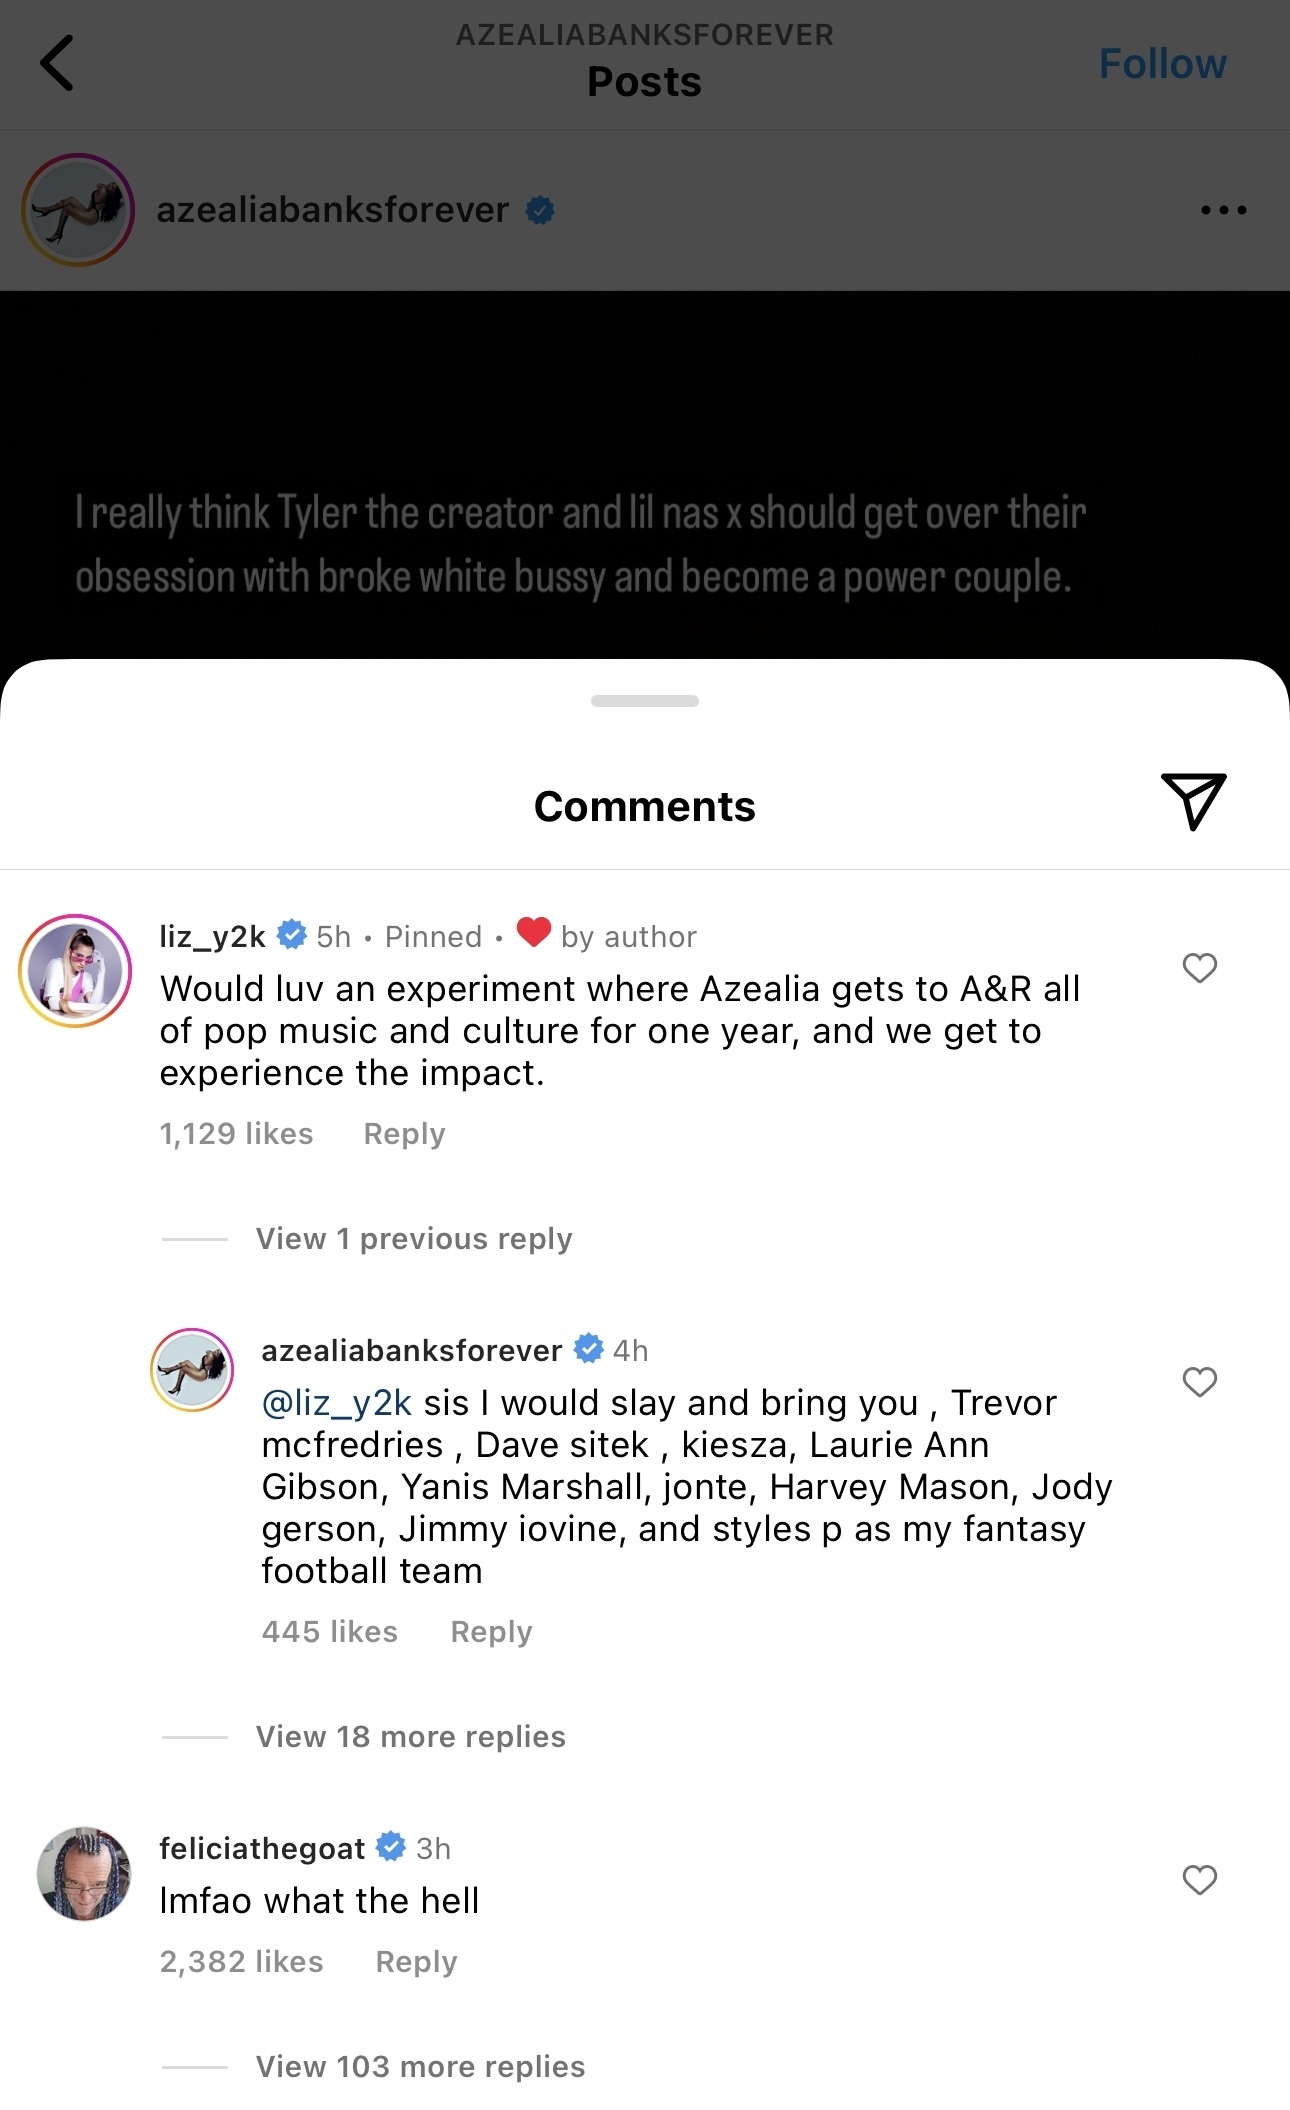 A screenshot from a social media platform showing a post by Azealia Banks with comments by other users engaging in a discussion about the music industry